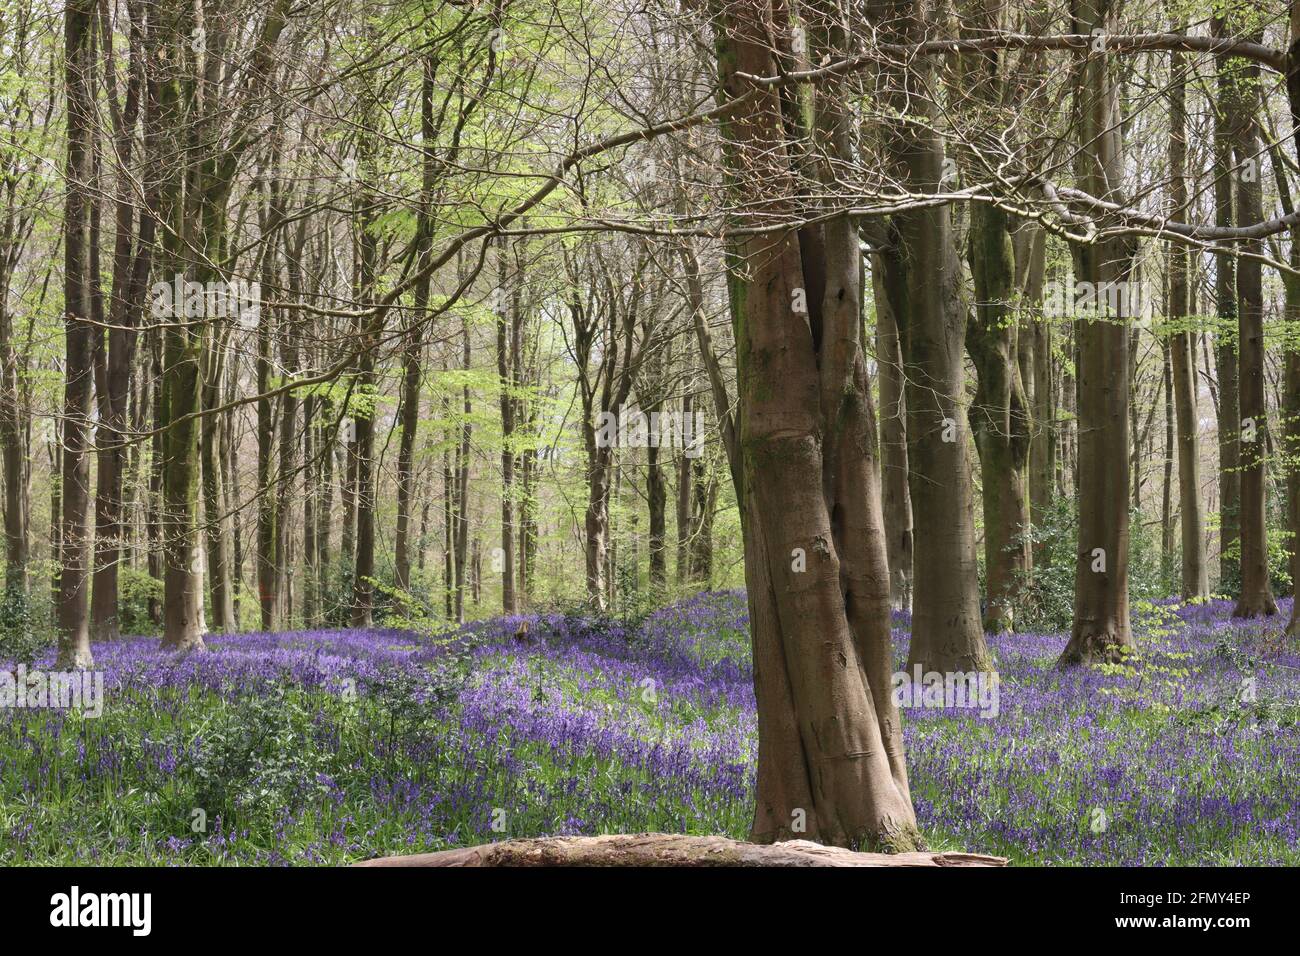 Bluebell Drifts - West Woods, Wiltshire. ROYAUME-UNI Banque D'Images